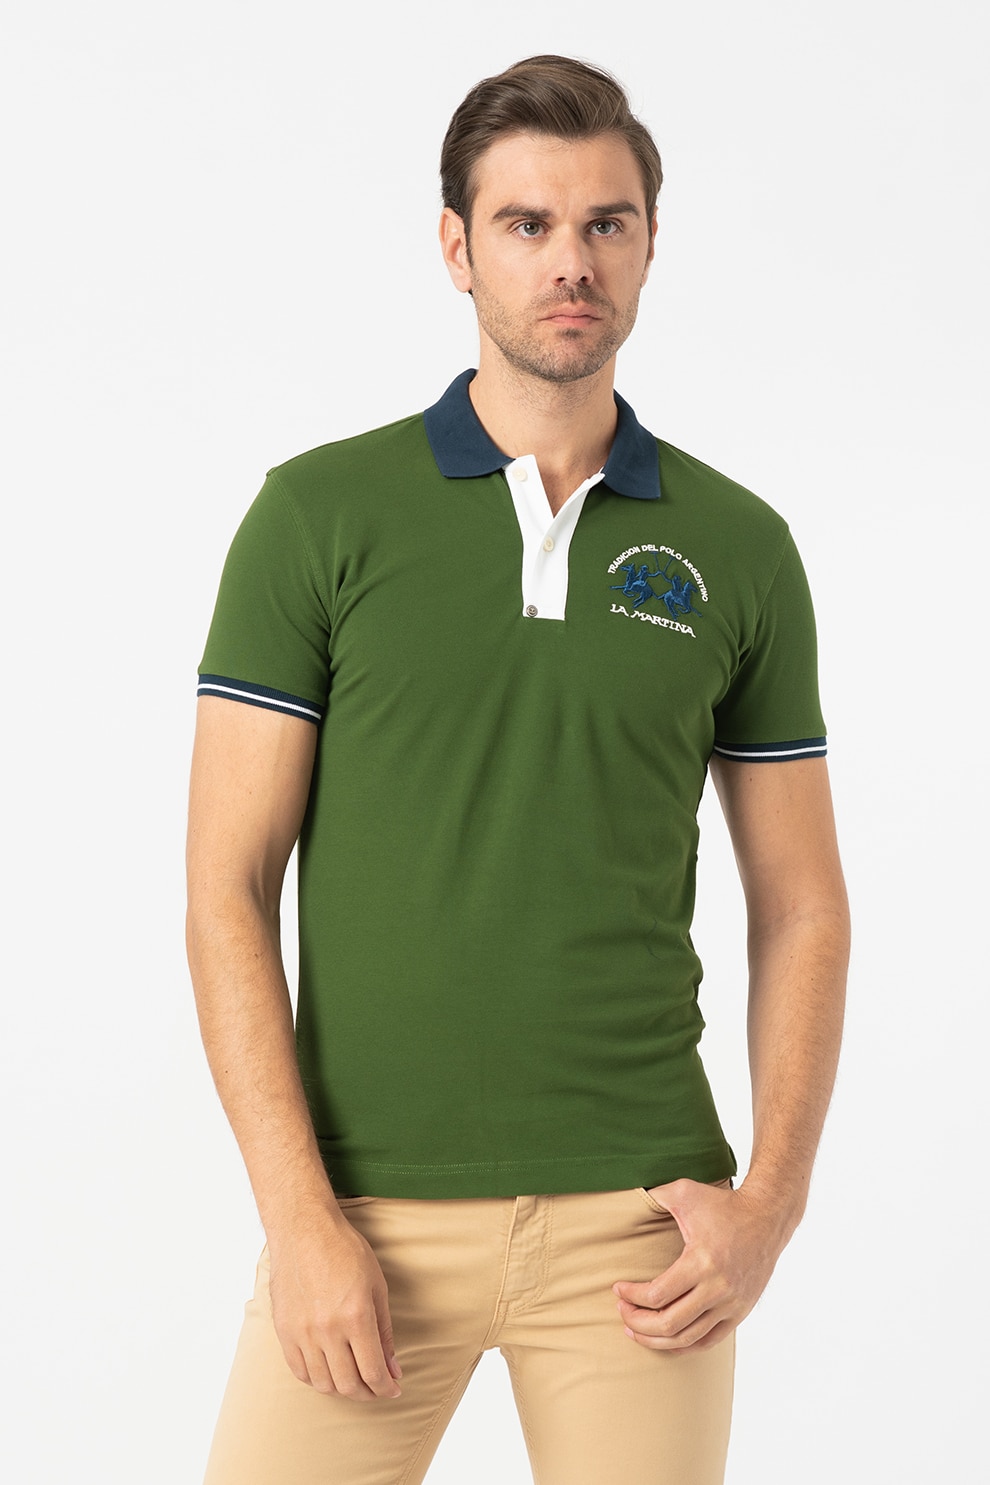 carriage efficiently Attempt LA MARTINA, Tricou polo slim fit, Verde/Bleumarin, M - eMAG.ro